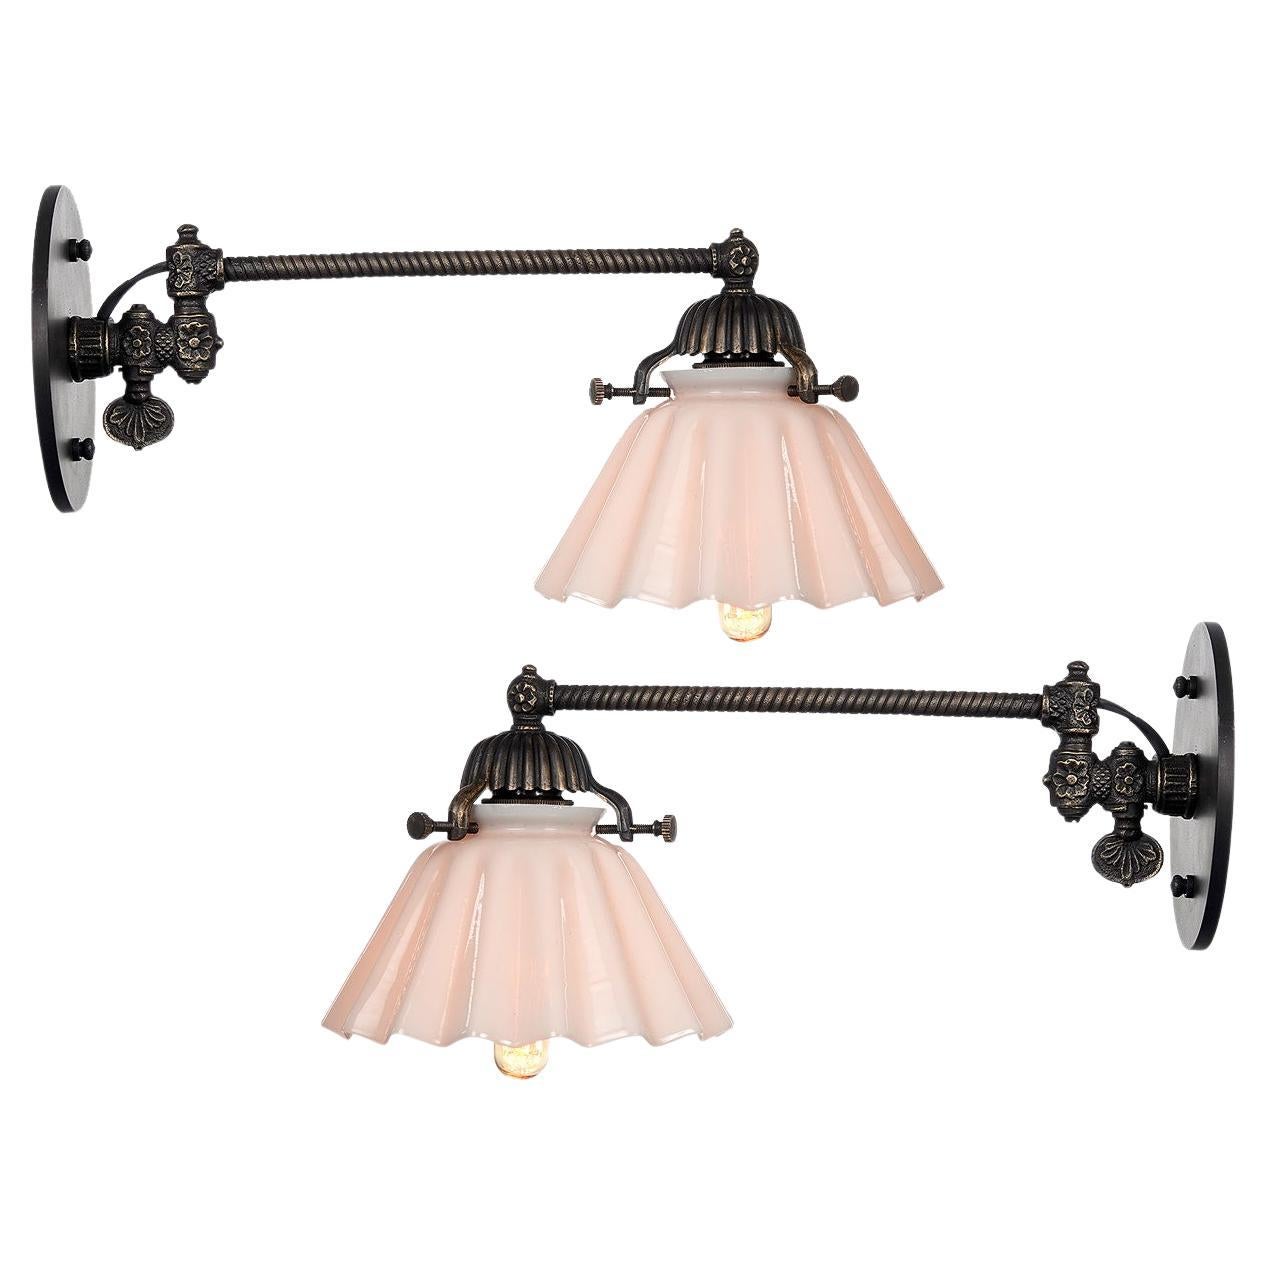 Pair of Articulated Gas Sconces with Pleated Milk Glass Shades